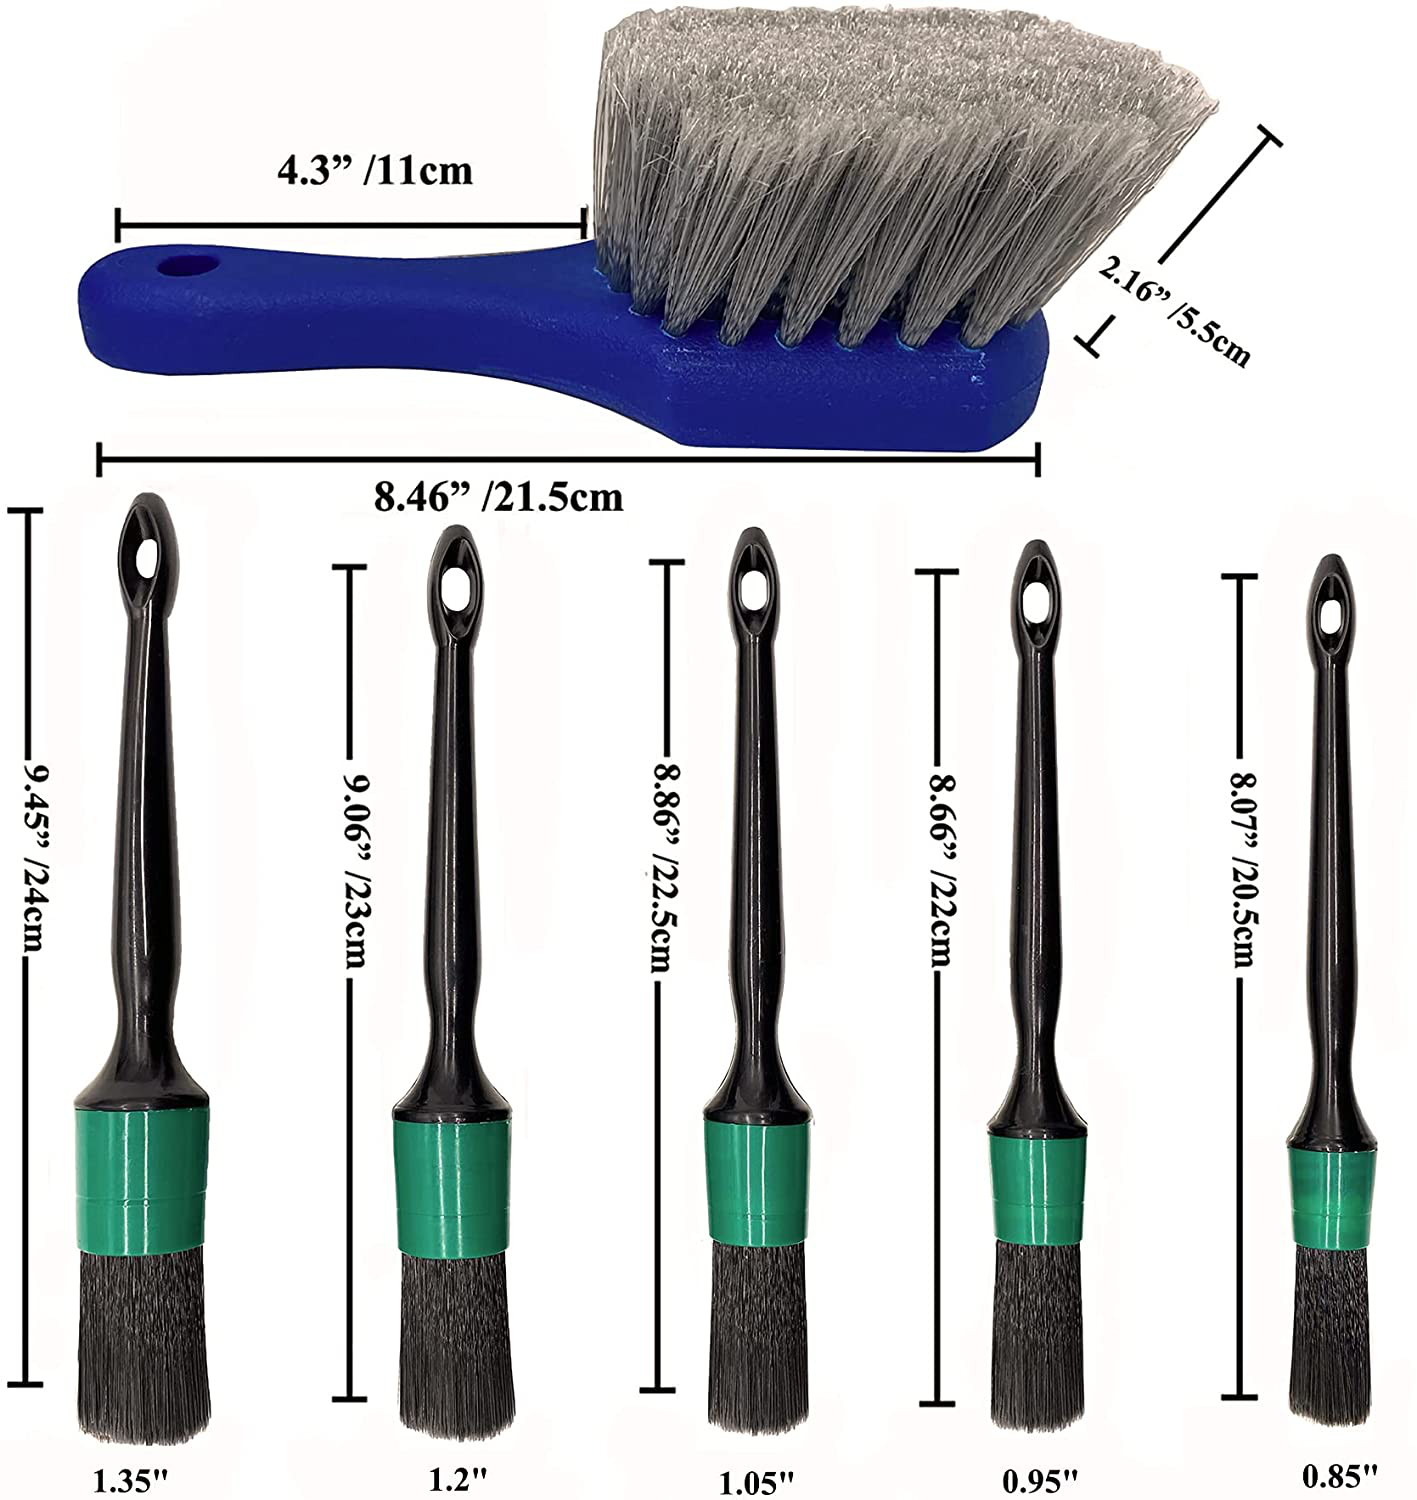 LUCKLYJONE 7Pcs Wheel & Tire Brush, Car Detailing Kit, 17inch Long Soft Wheel Brush 5 Car Wash Detail Brush Car Wash Kit for Cleans Dirty Tires & Releases Dirt and Road Grime, Short Handle(Green)